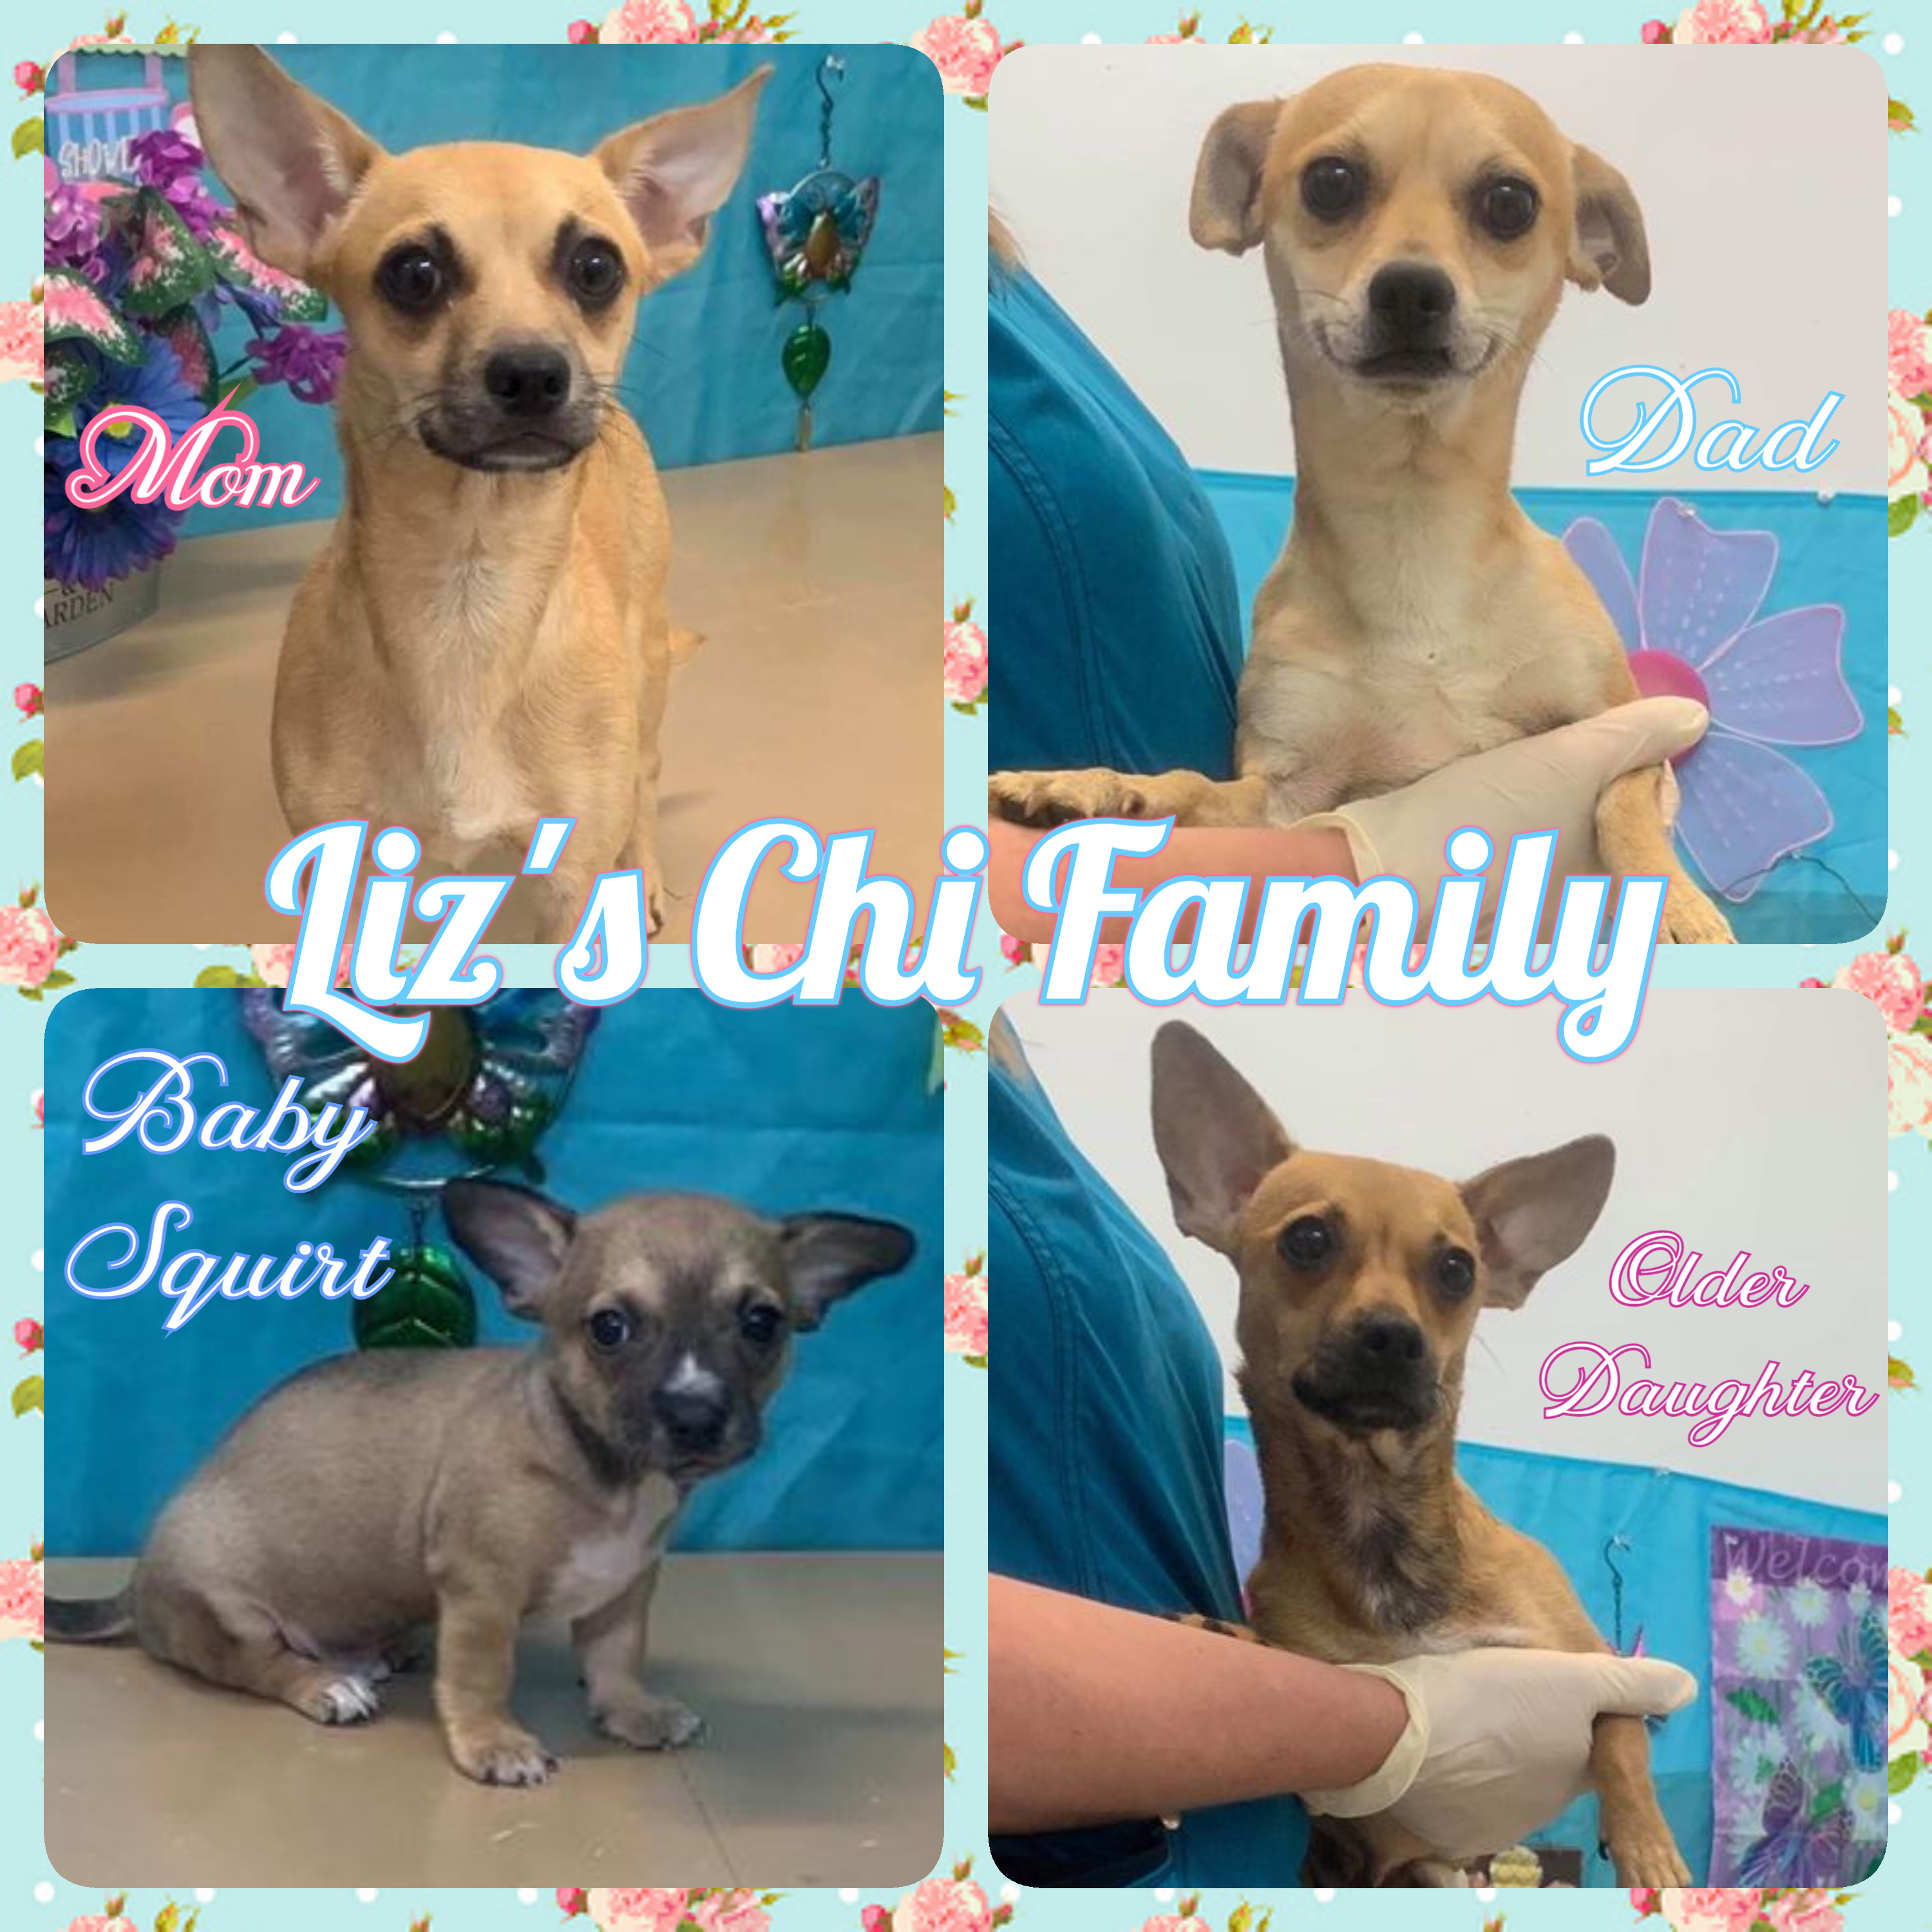 Lizs Chi Family detail page